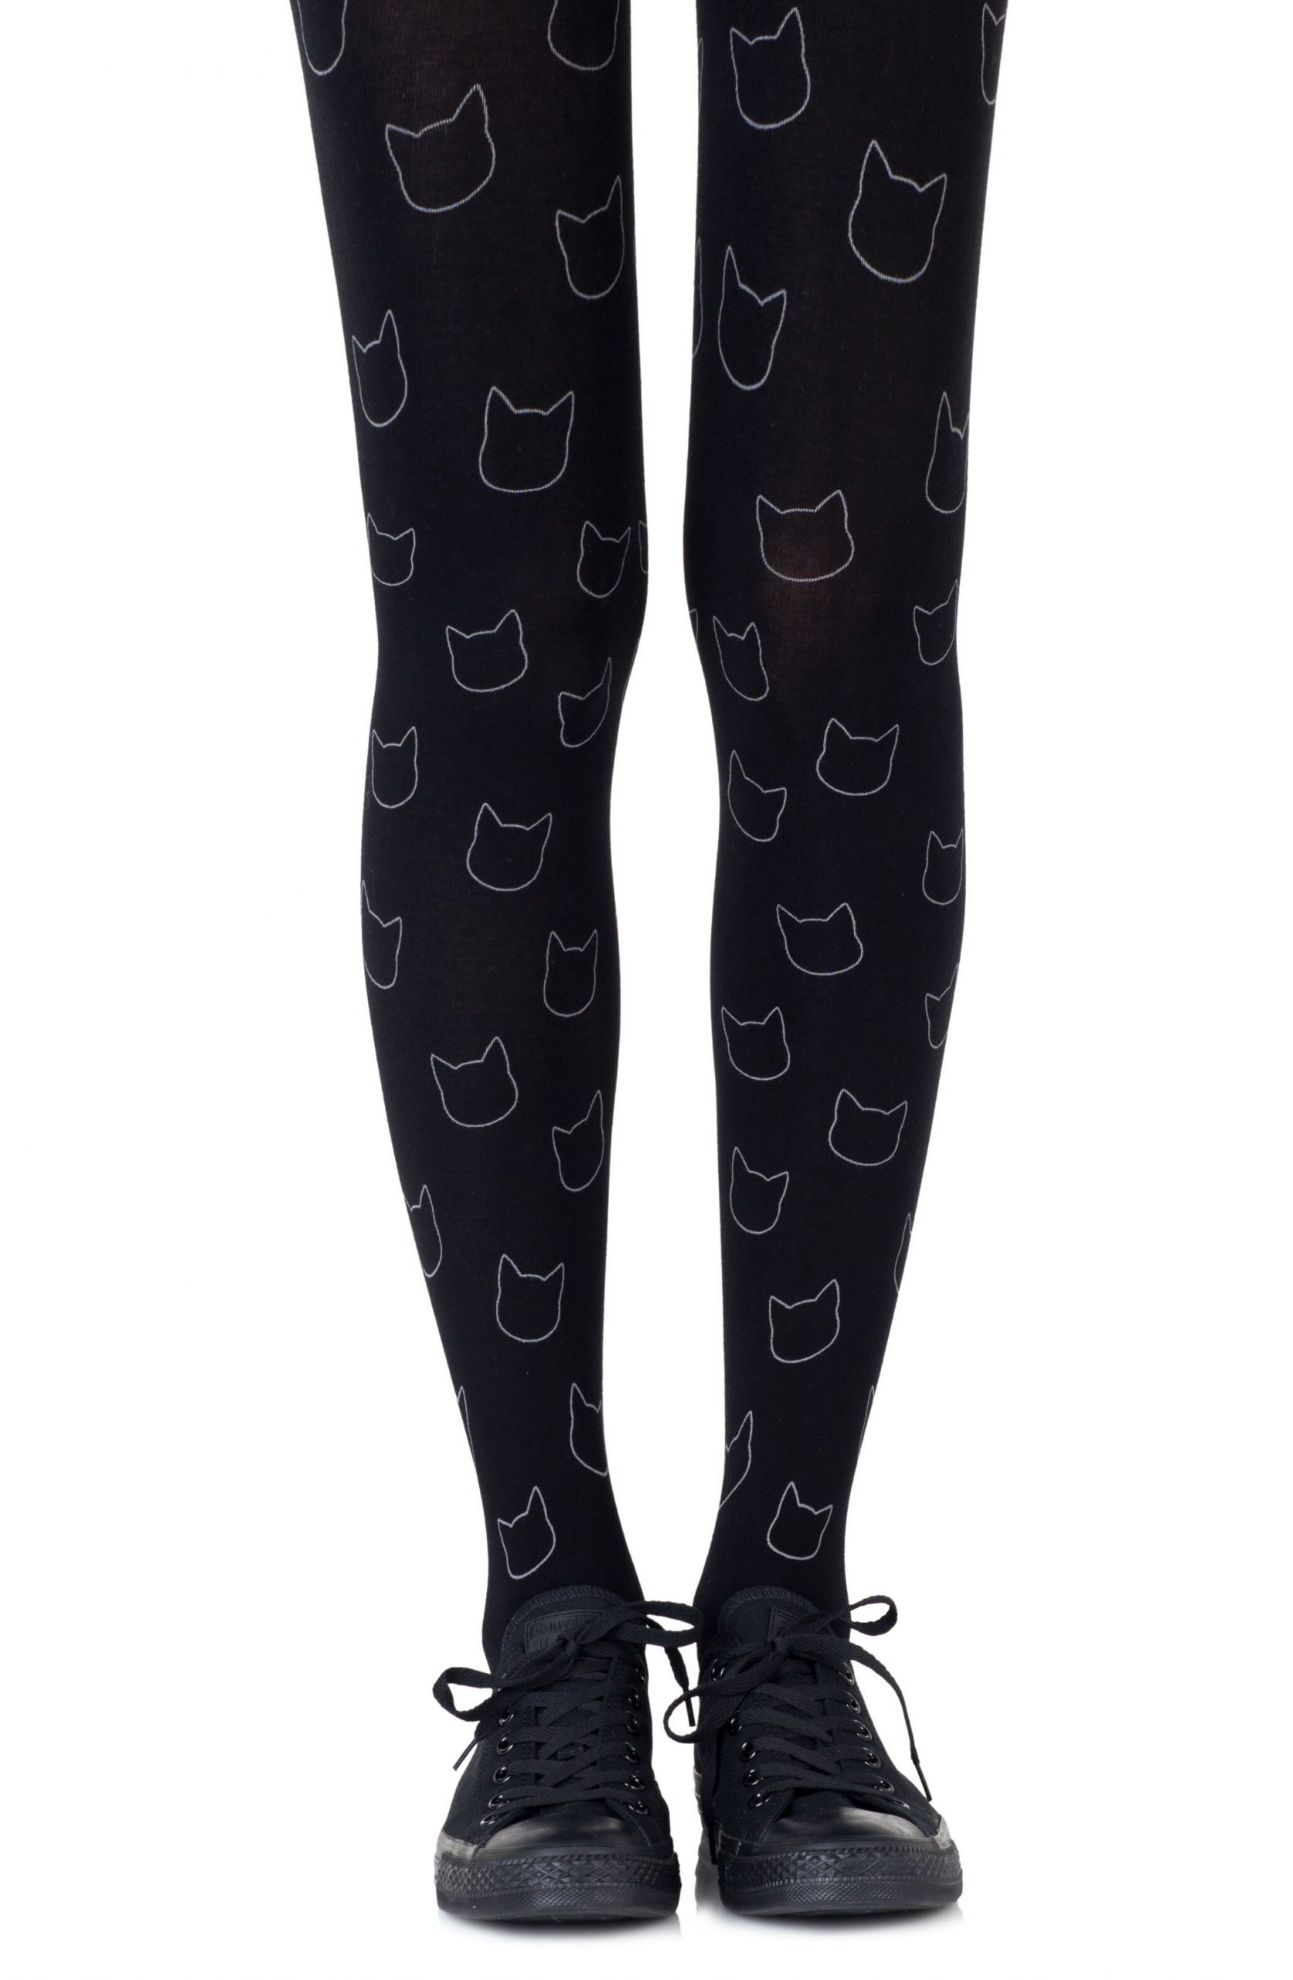 Picture of Zohara "Cat Nap" Light Grey Print Tights